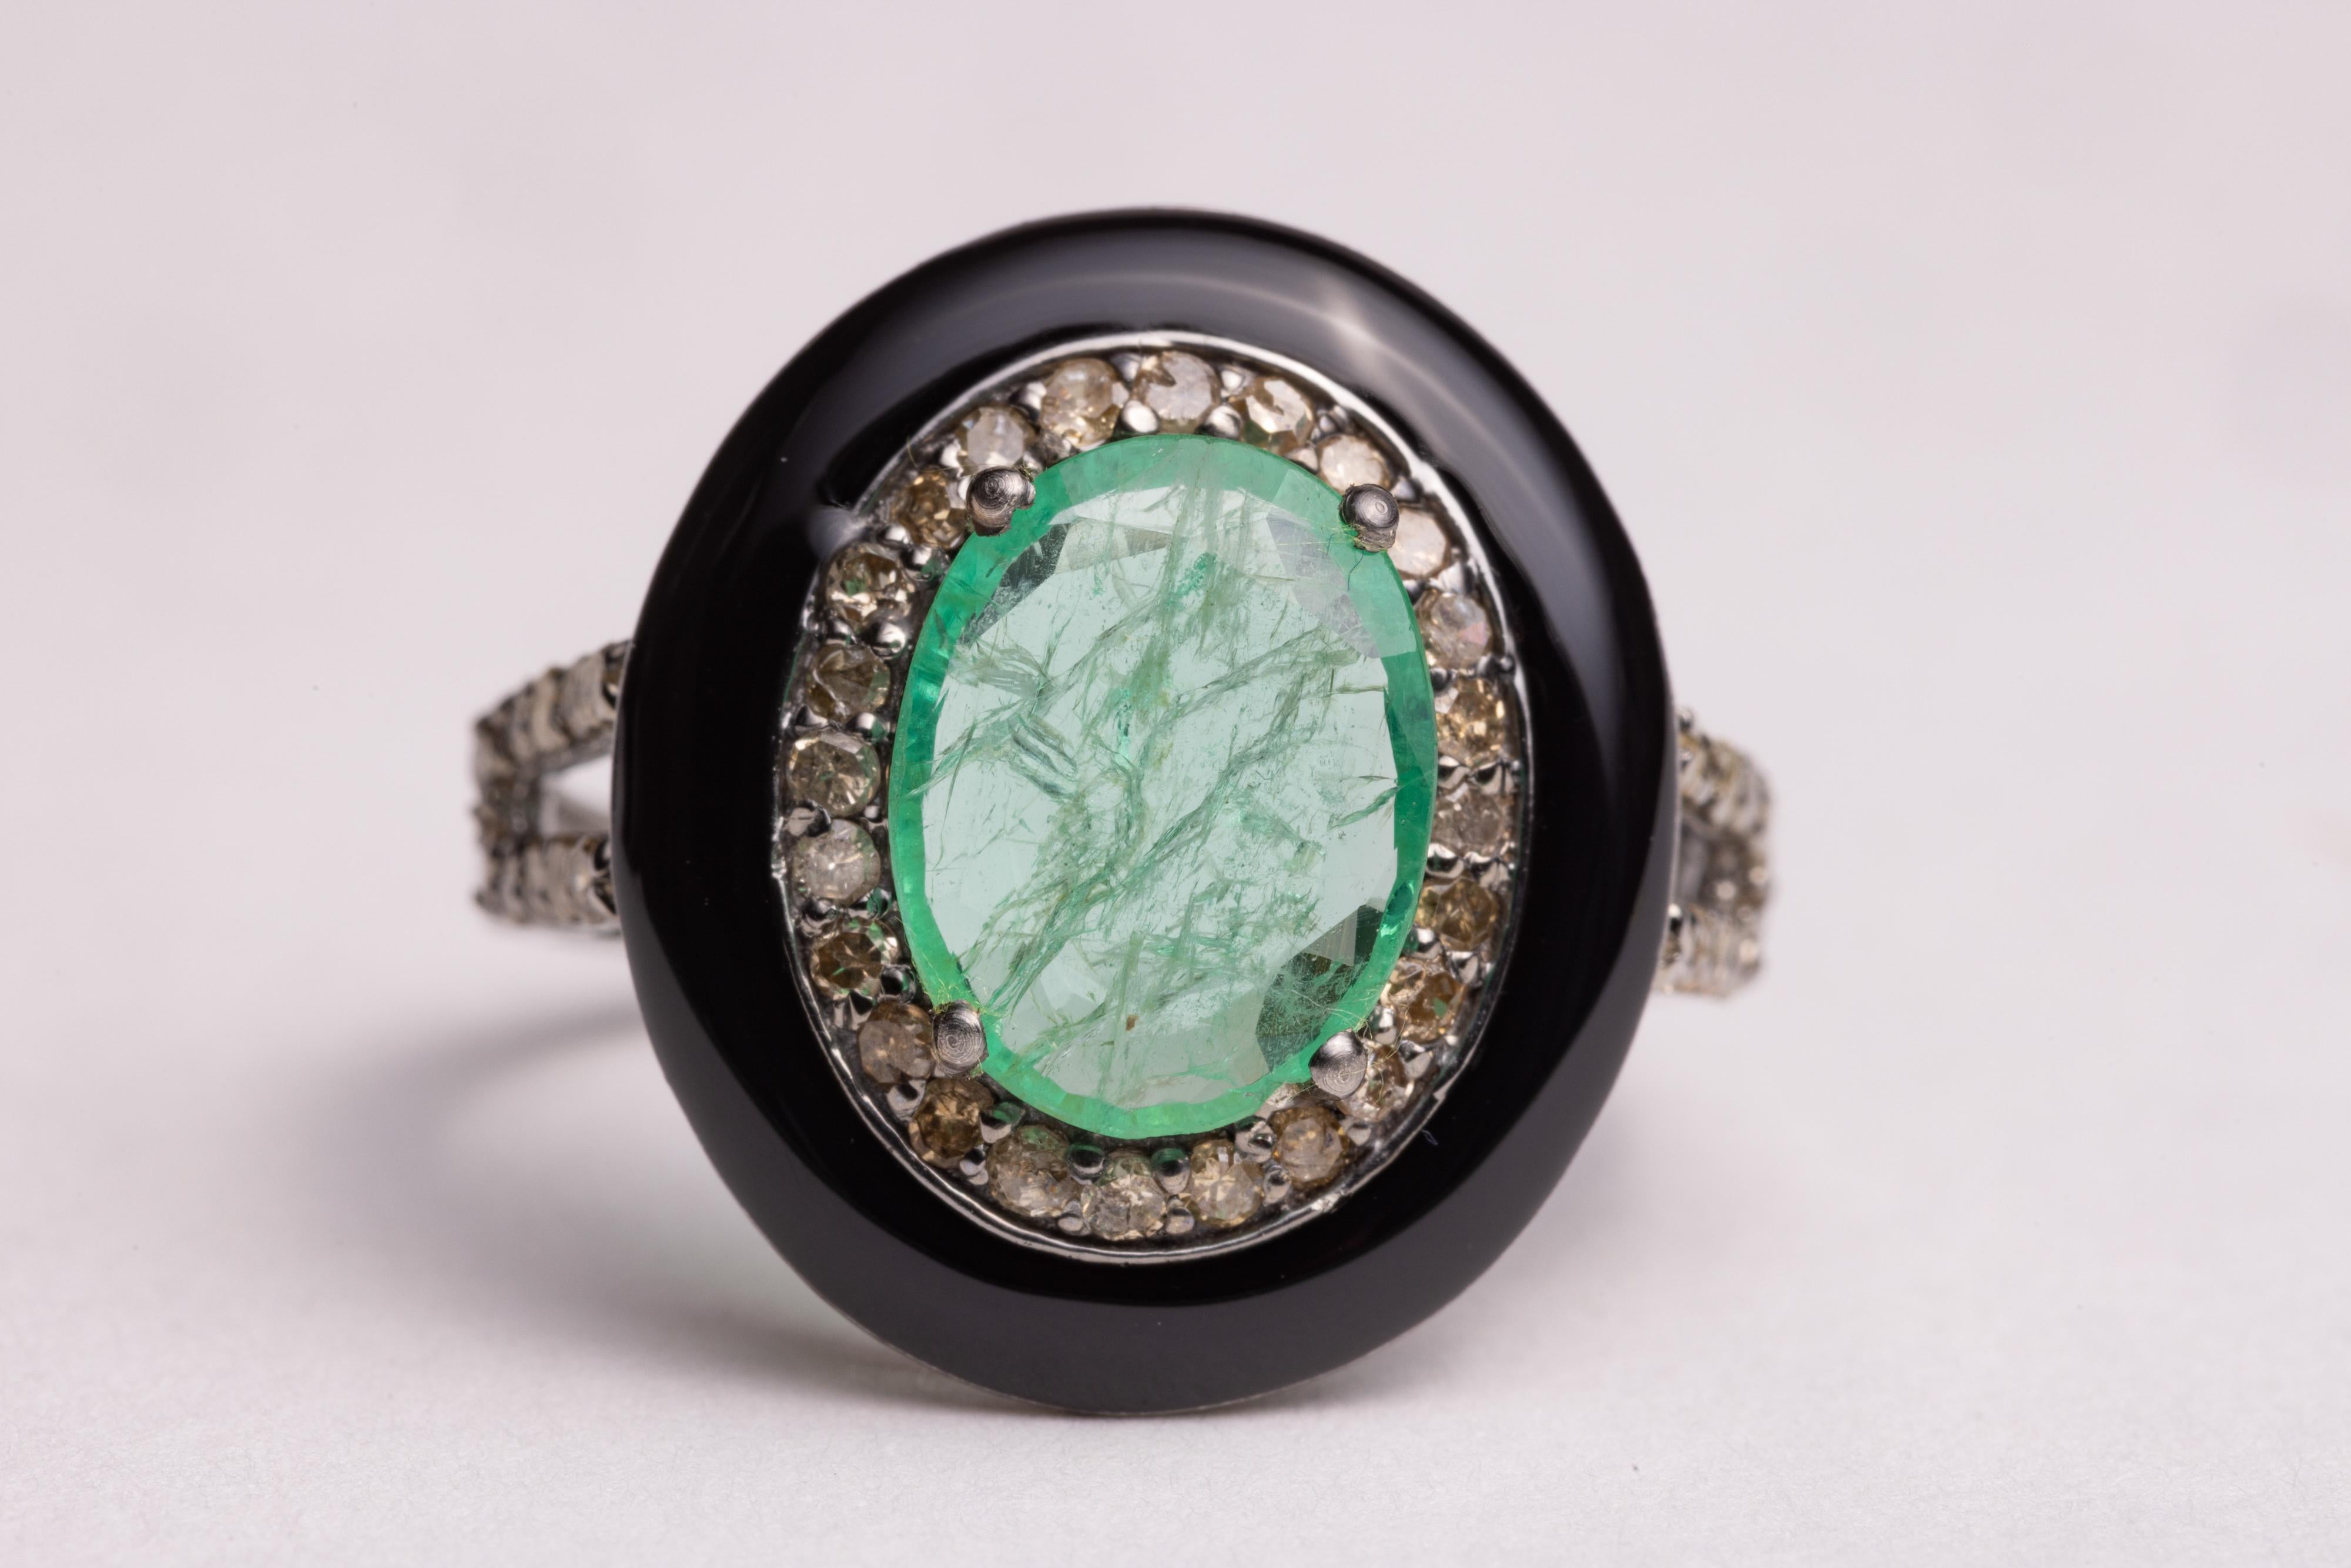 An oval, faceted emerald surrounded by round, brilliant cut diamonds and a ring of black onyx. Diamonds along the band's shoulder as well.  Diamonds total .60 carats, emeralds is 1.7 carats.  Ring size is 8.

The fine jewelry collection is sourced,